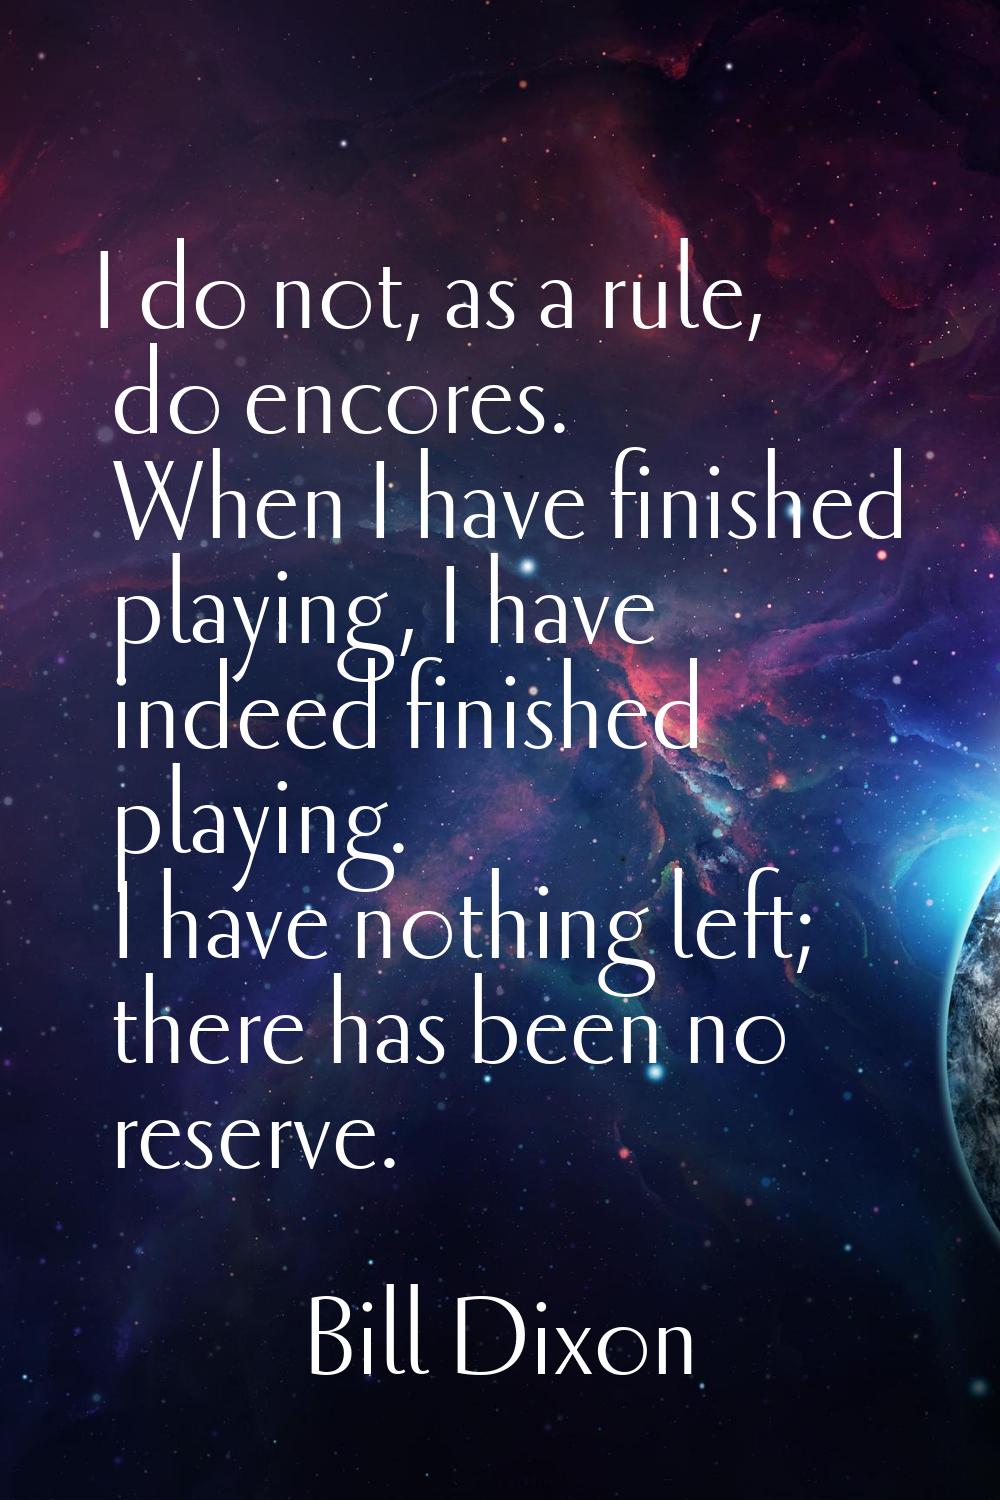 I do not, as a rule, do encores. When I have finished playing, I have indeed finished playing. I ha